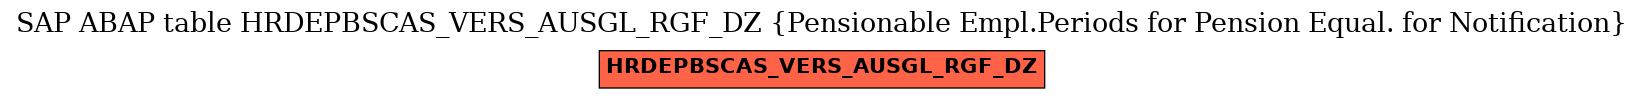 E-R Diagram for table HRDEPBSCAS_VERS_AUSGL_RGF_DZ (Pensionable Empl.Periods for Pension Equal. for Notification)